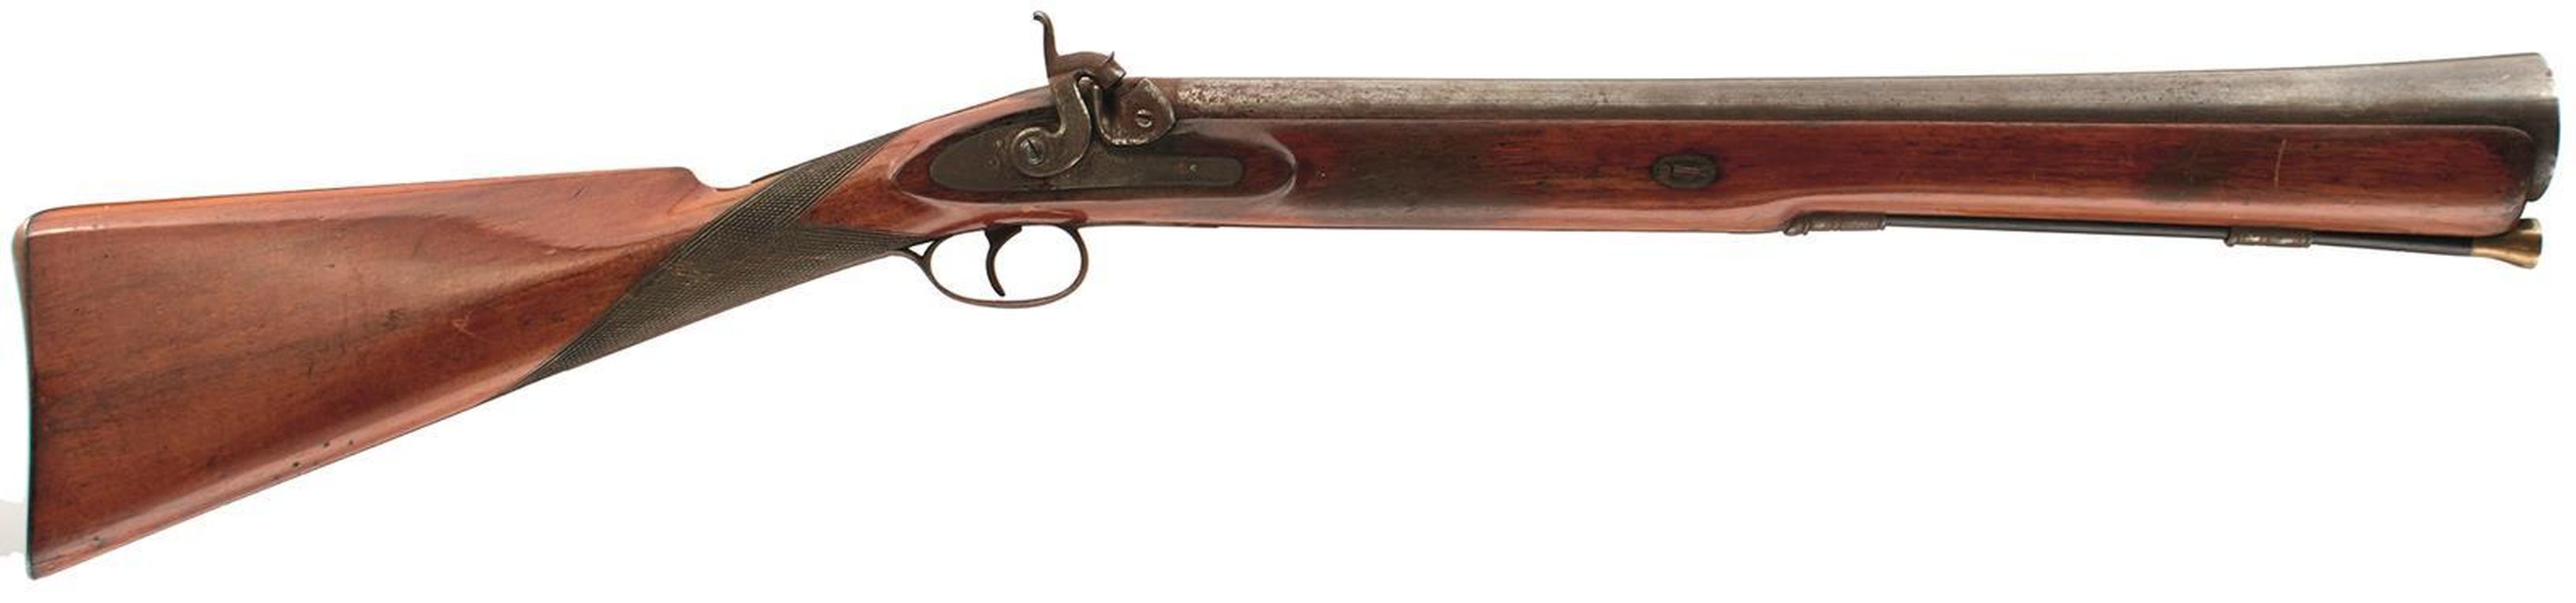 A LARGE PERCUSSION BLUNDERBUSS, 21.75inch barrel with 2.25inch diameter flared muzzle, engraved J.